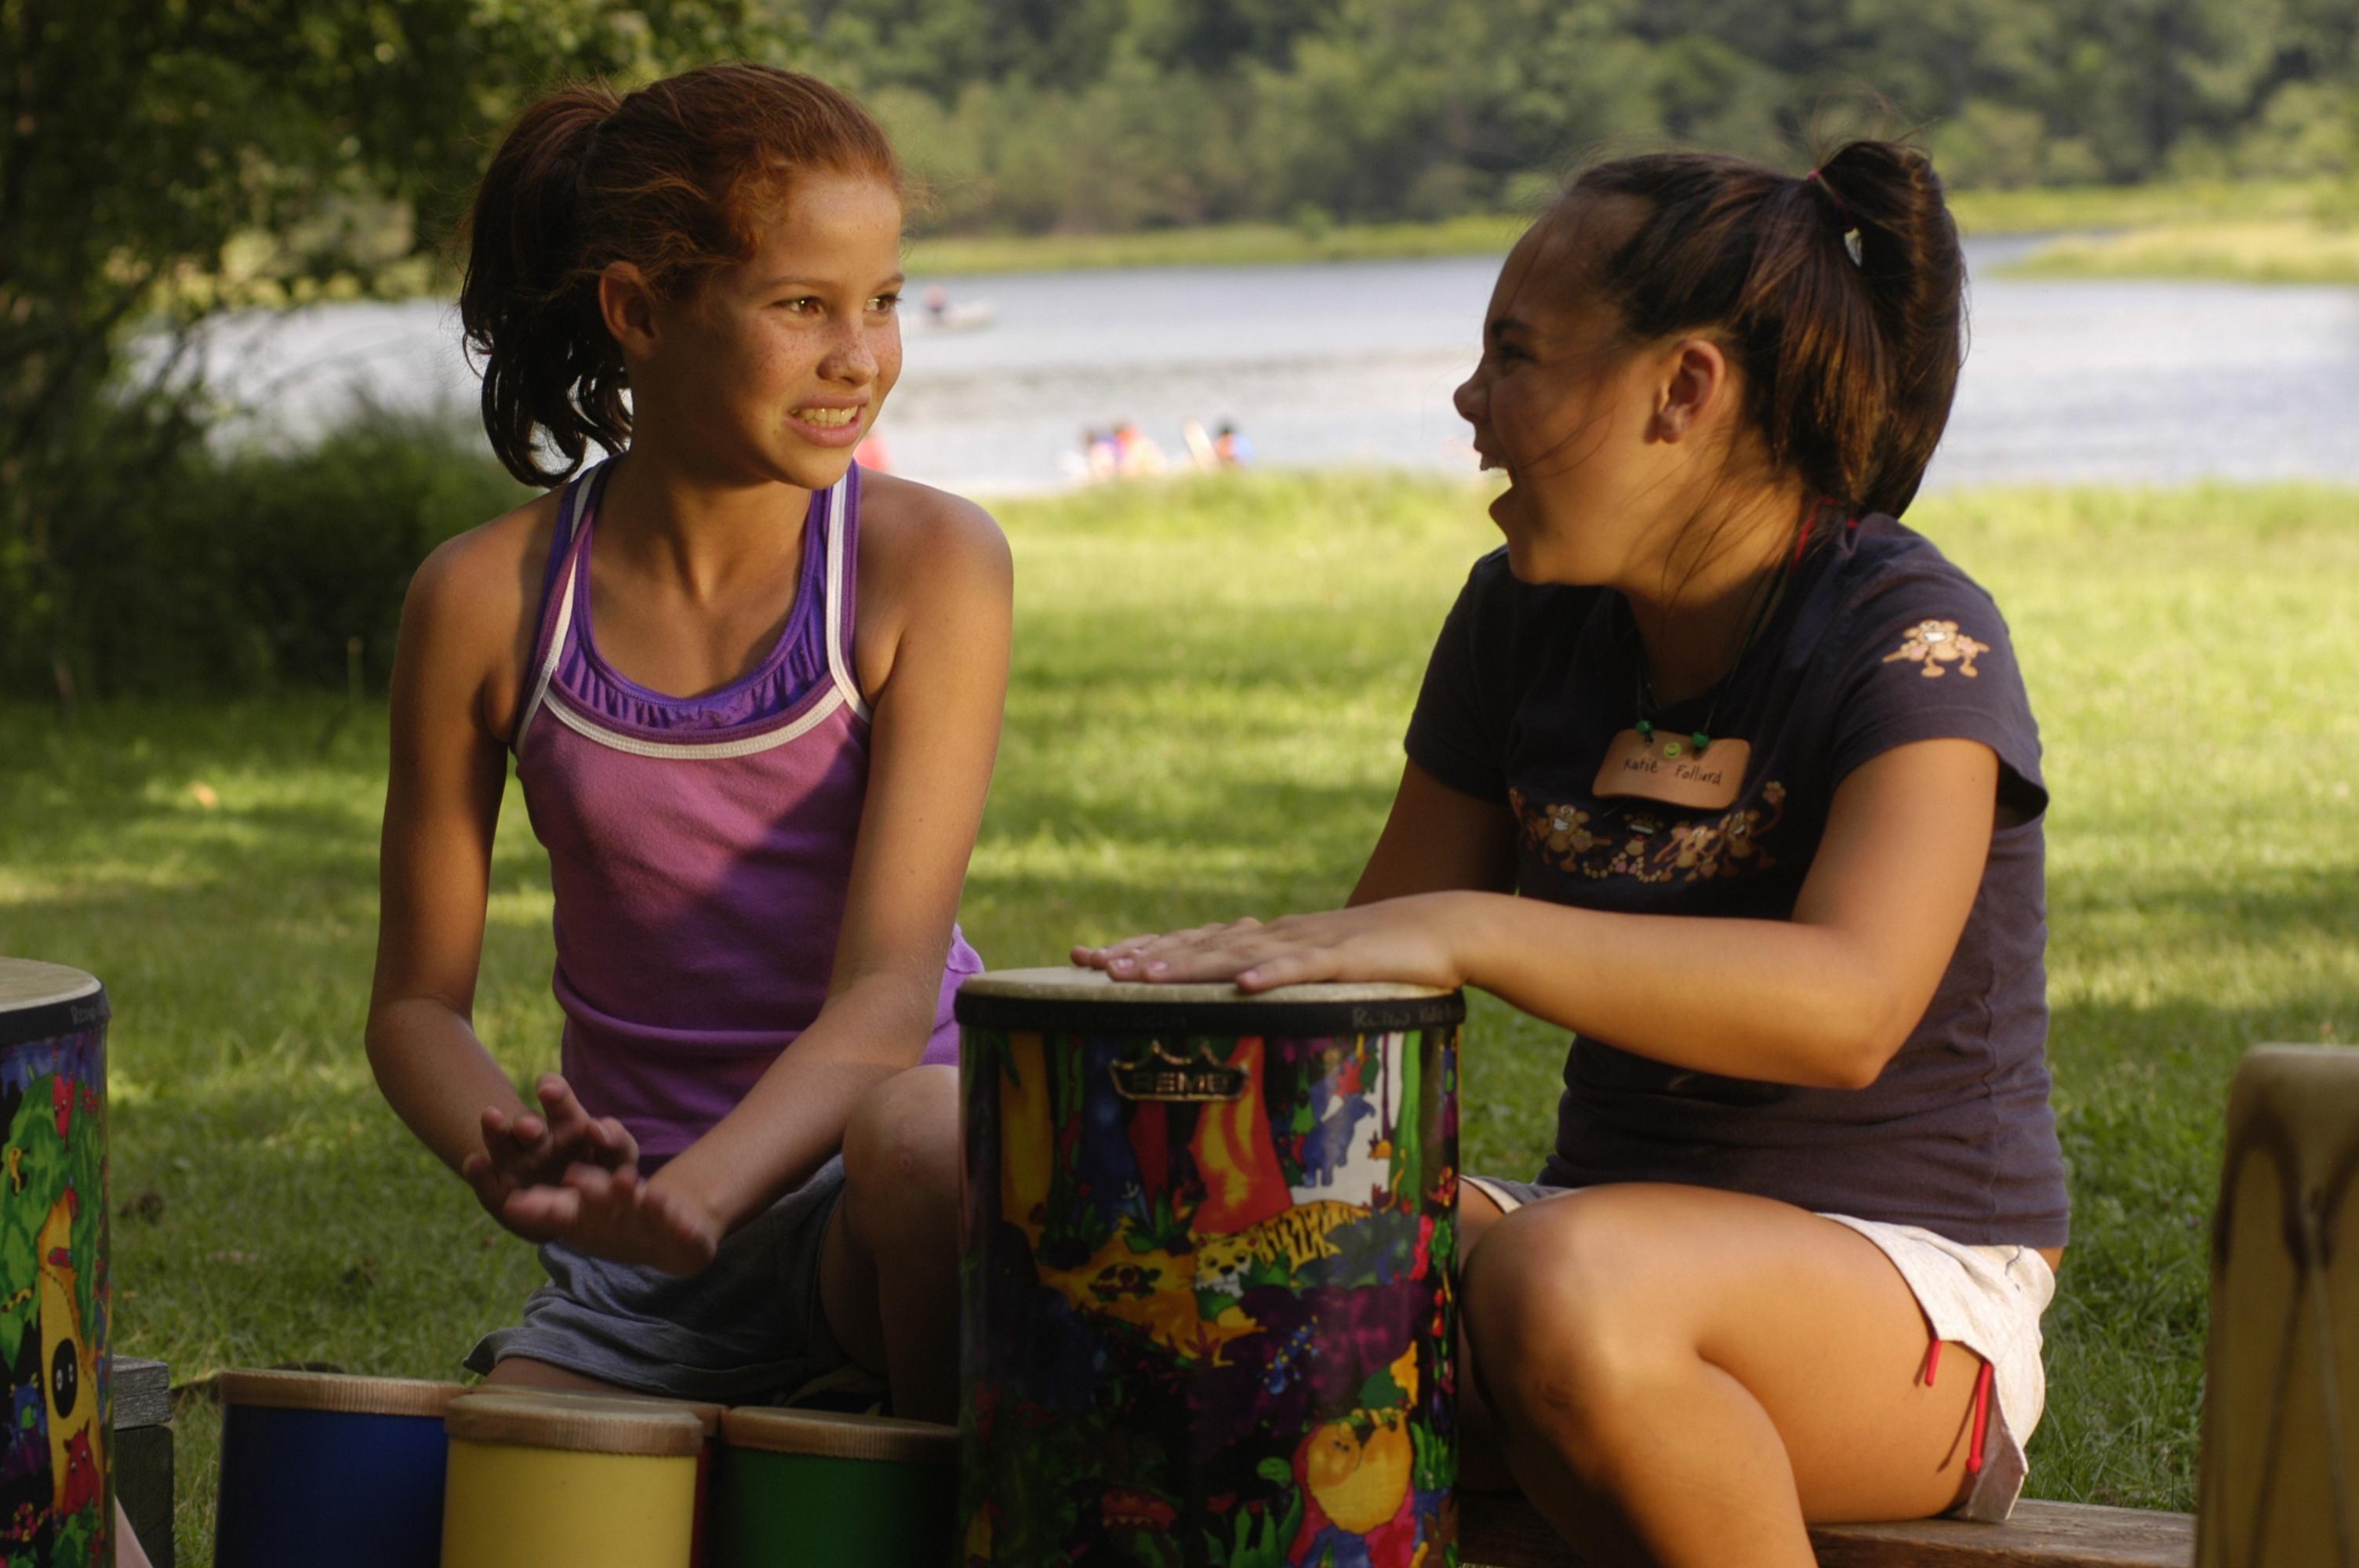 Two girls sitting on benches in front of a lake, drumming and laughing.